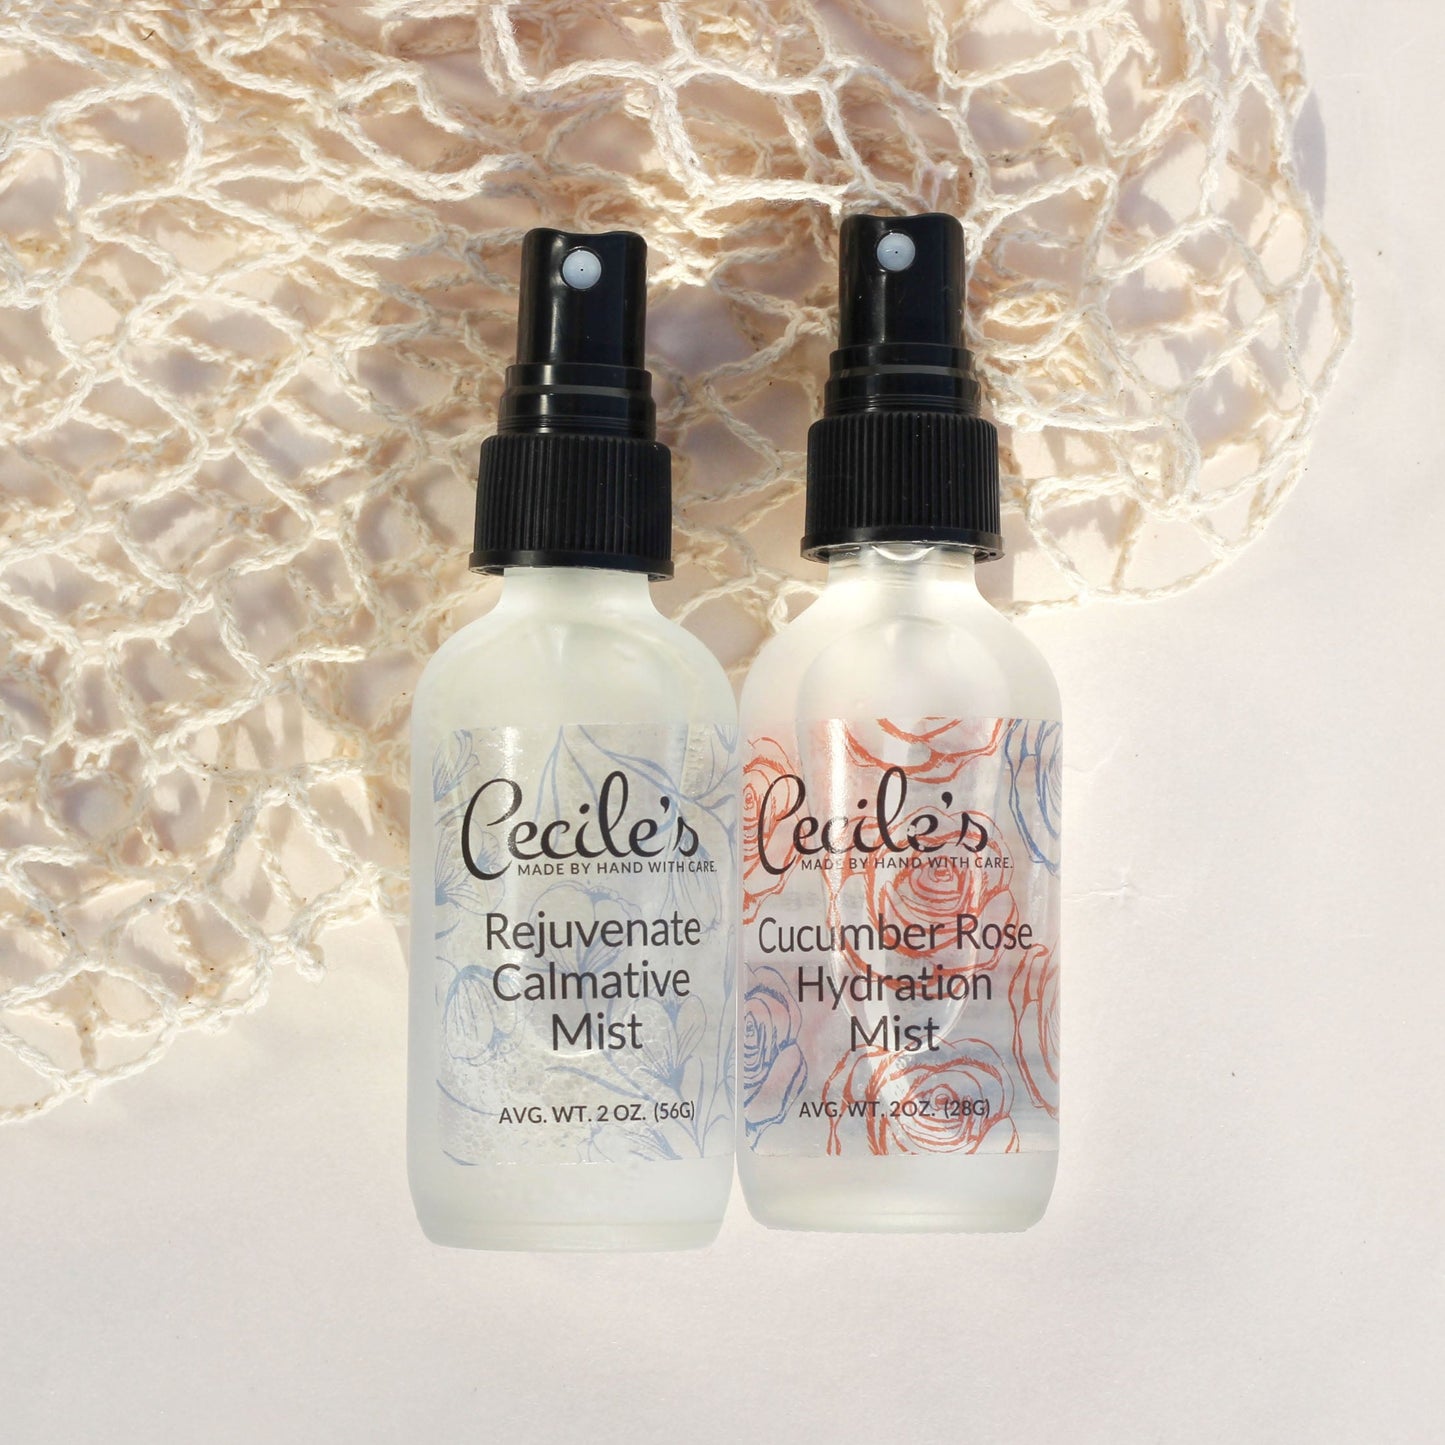 Cecile's Rejuvenate Calmative Mist aromatherapy, and Cucumber Rose Hydration Mist toner and facial refresher mist hydration